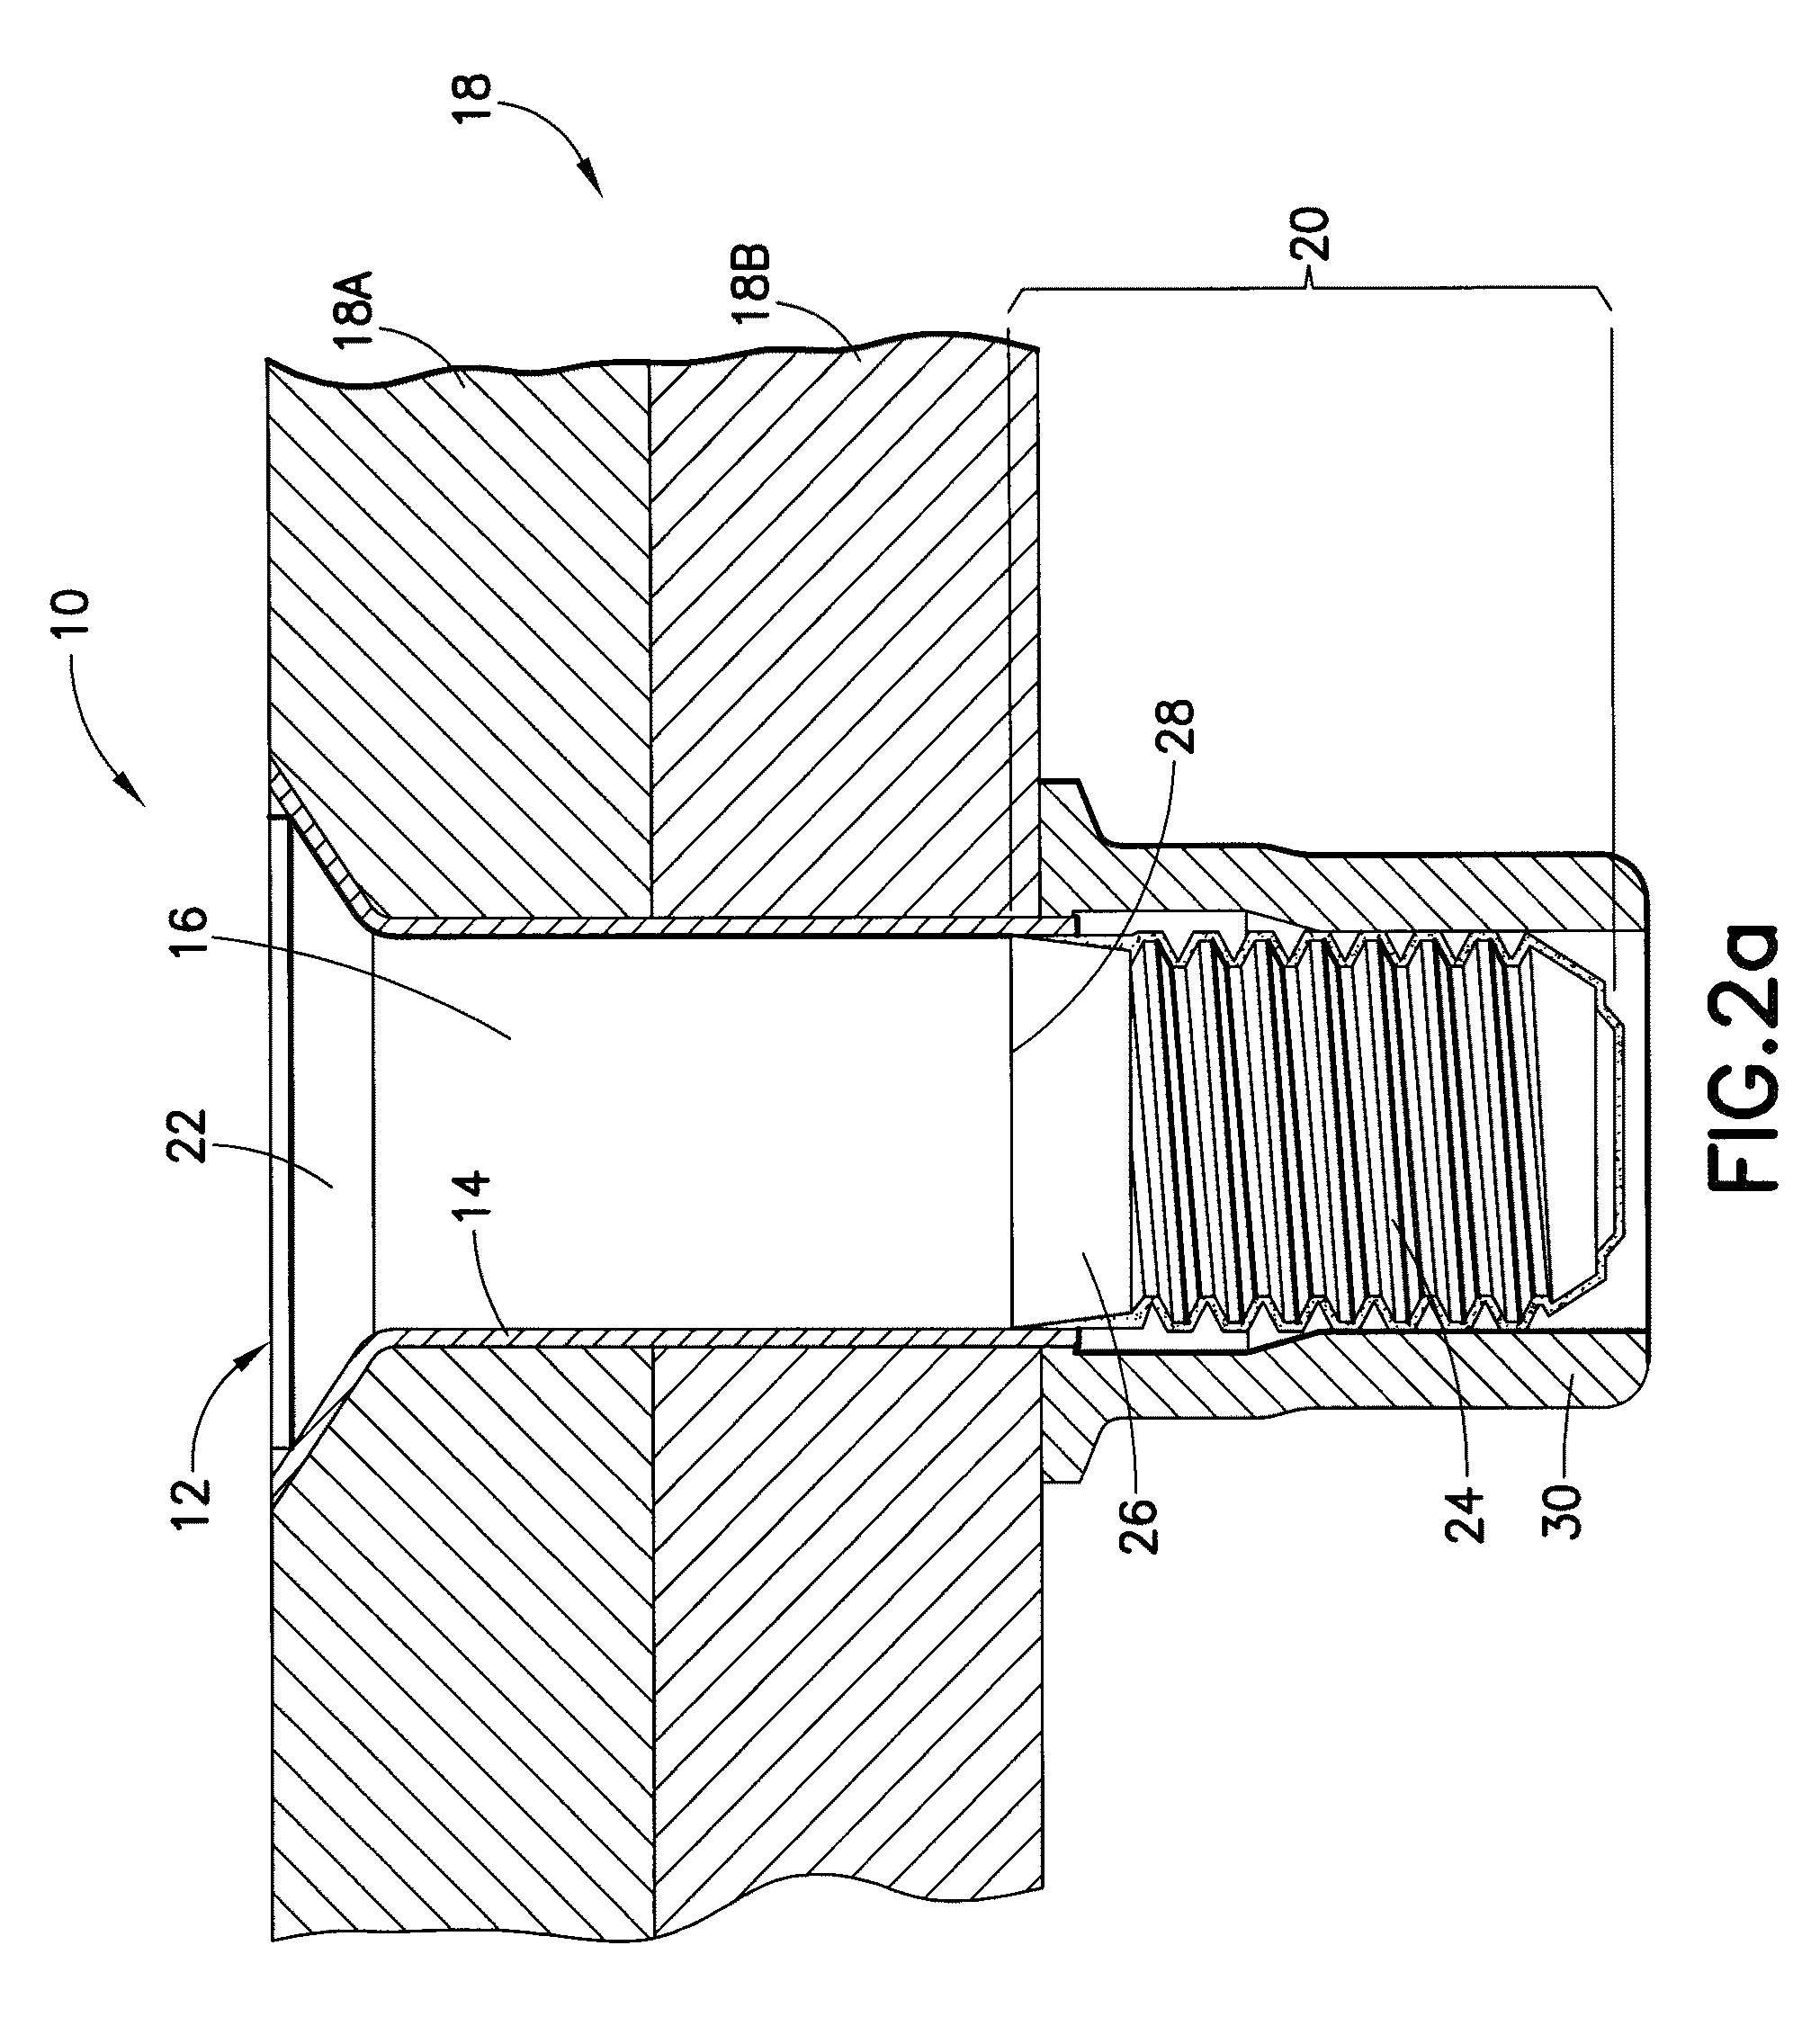 Enhanced conductivity sleeved fastener and method for making same